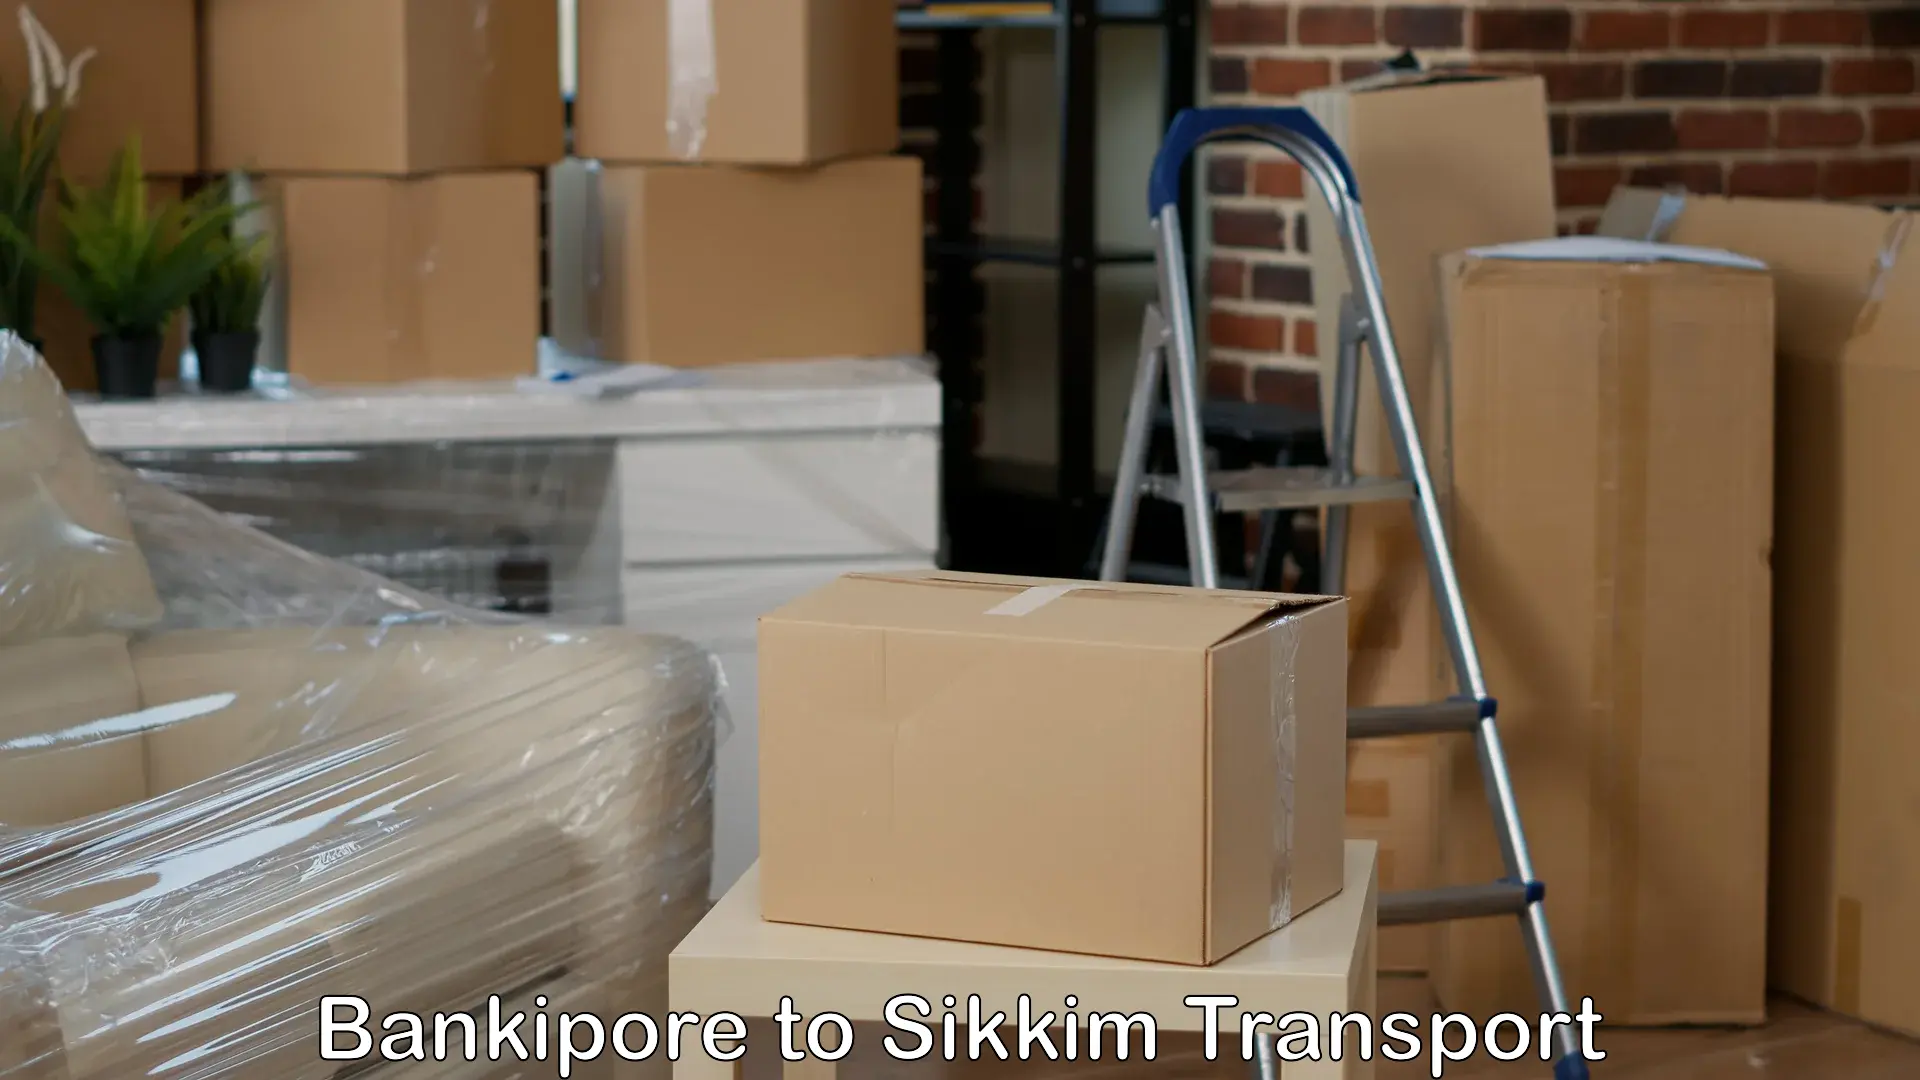 Container transport service Bankipore to Sikkim